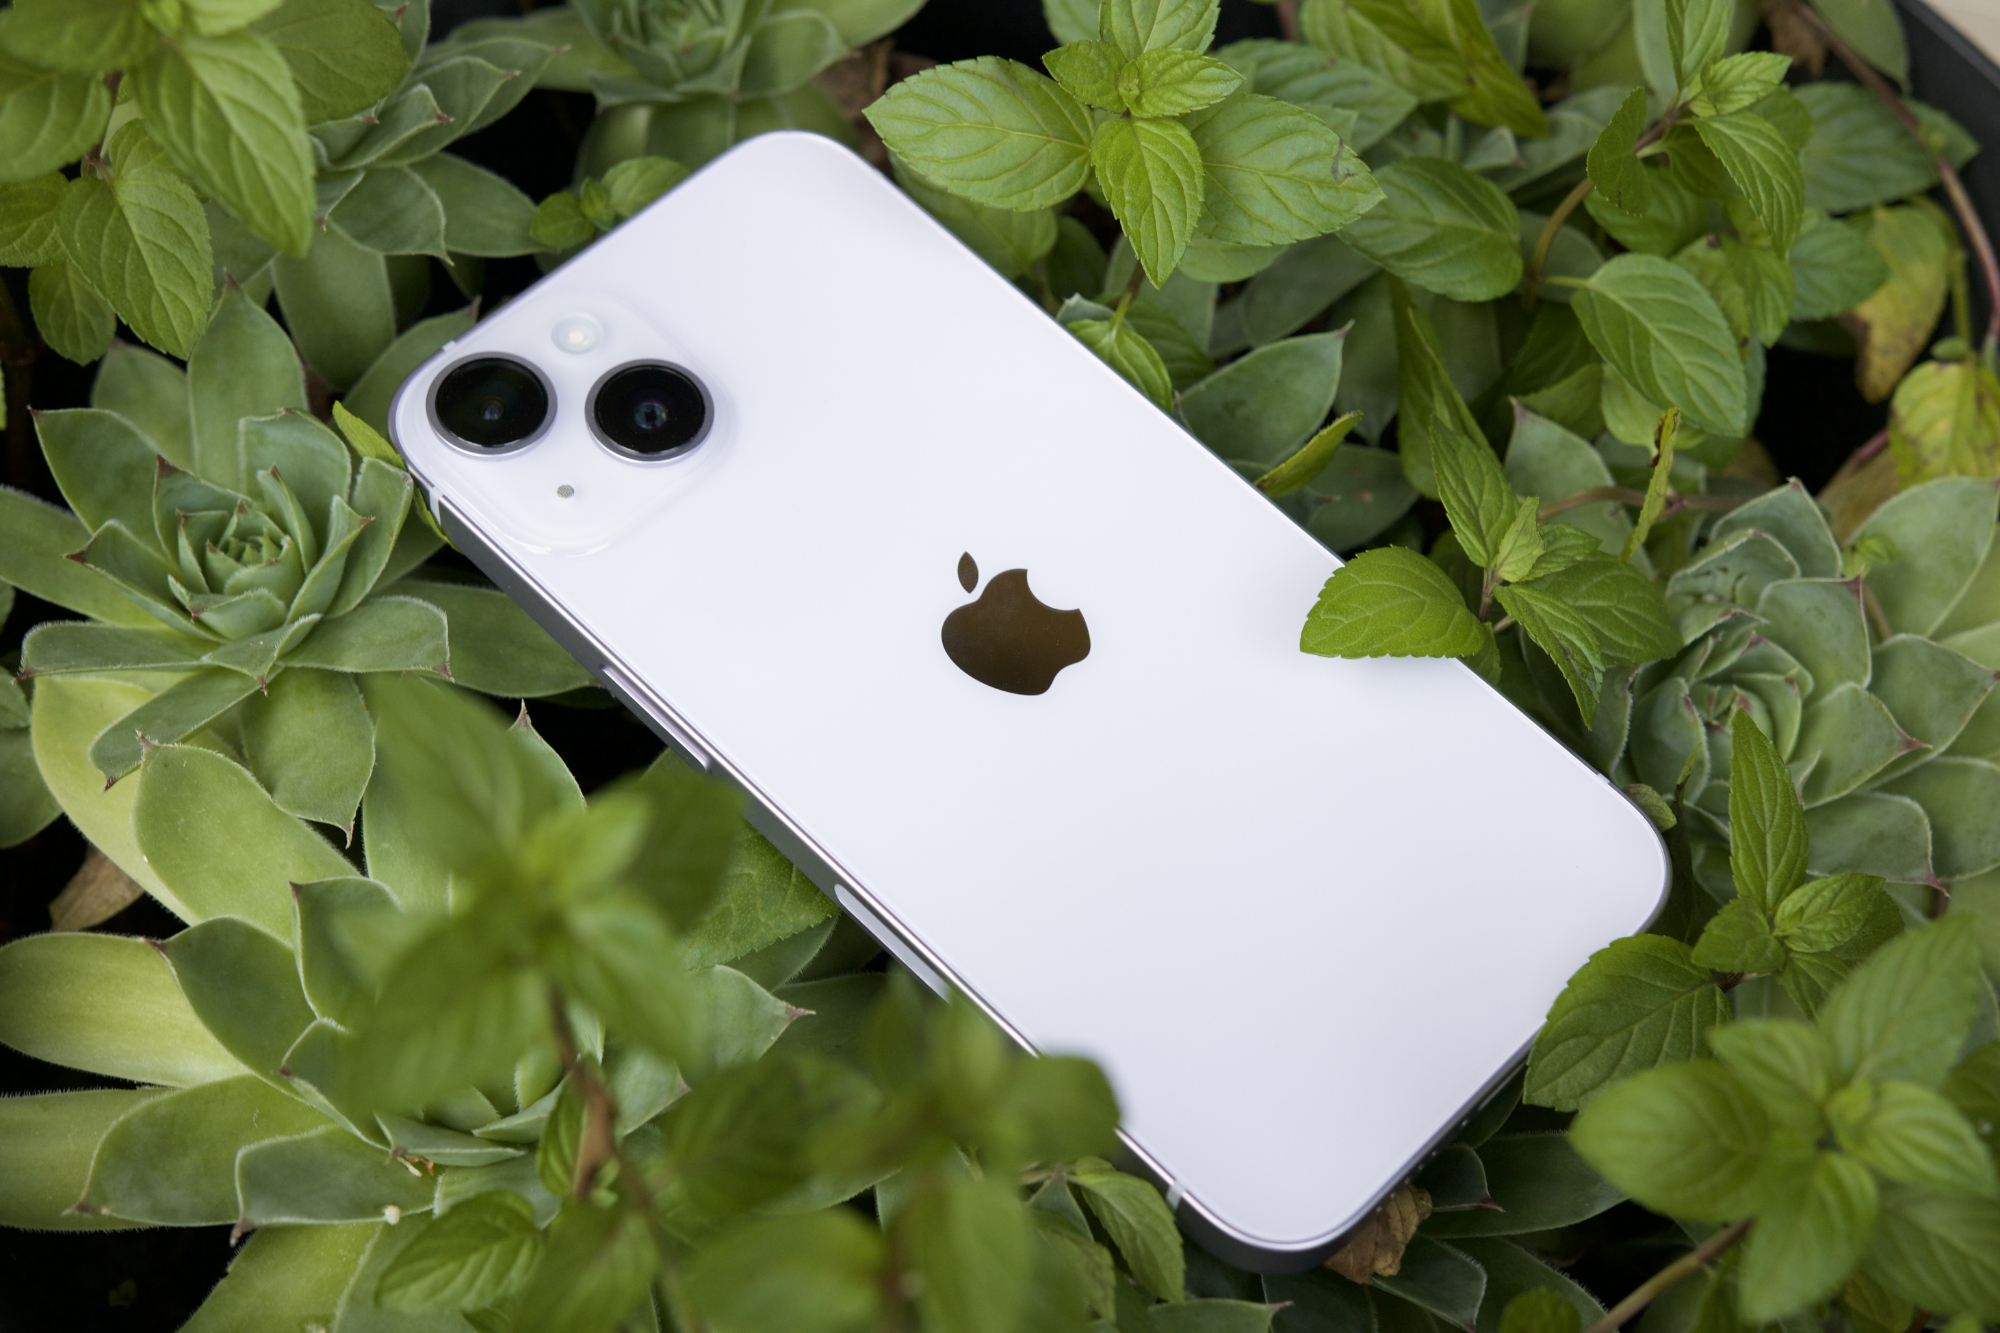 iPhone 14 mini — here's why the iPhone 14 Max is likely replacing it